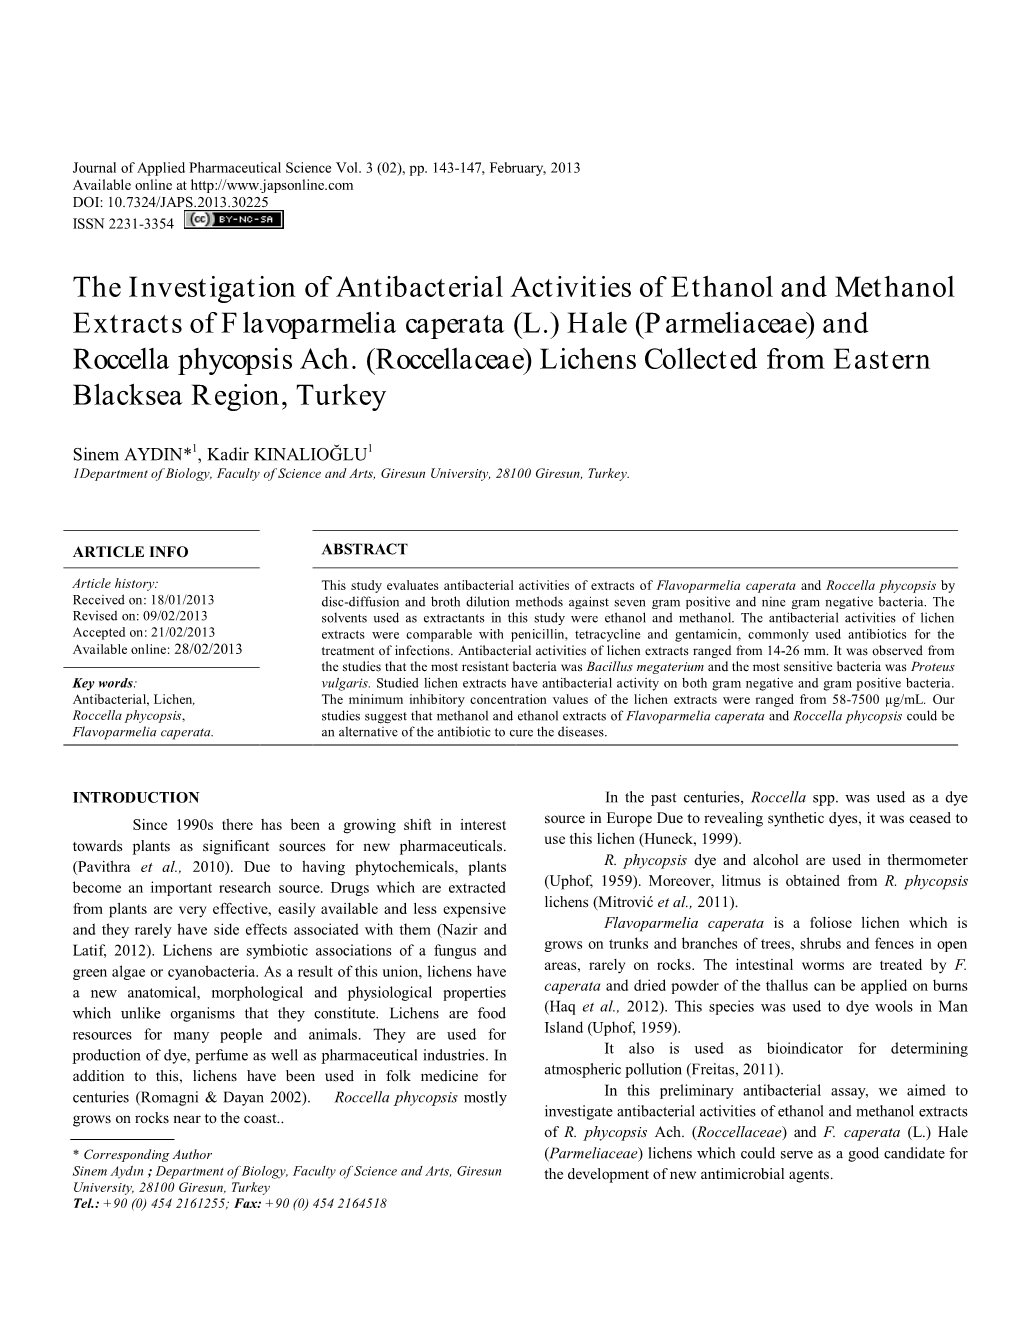 The Investigation of Antibacterial Activities of Ethanol and Methanol Extracts of Flavoparmelia Caperata (L.) Hale (Parmeliaceae) and Roccella Phycopsis Ach